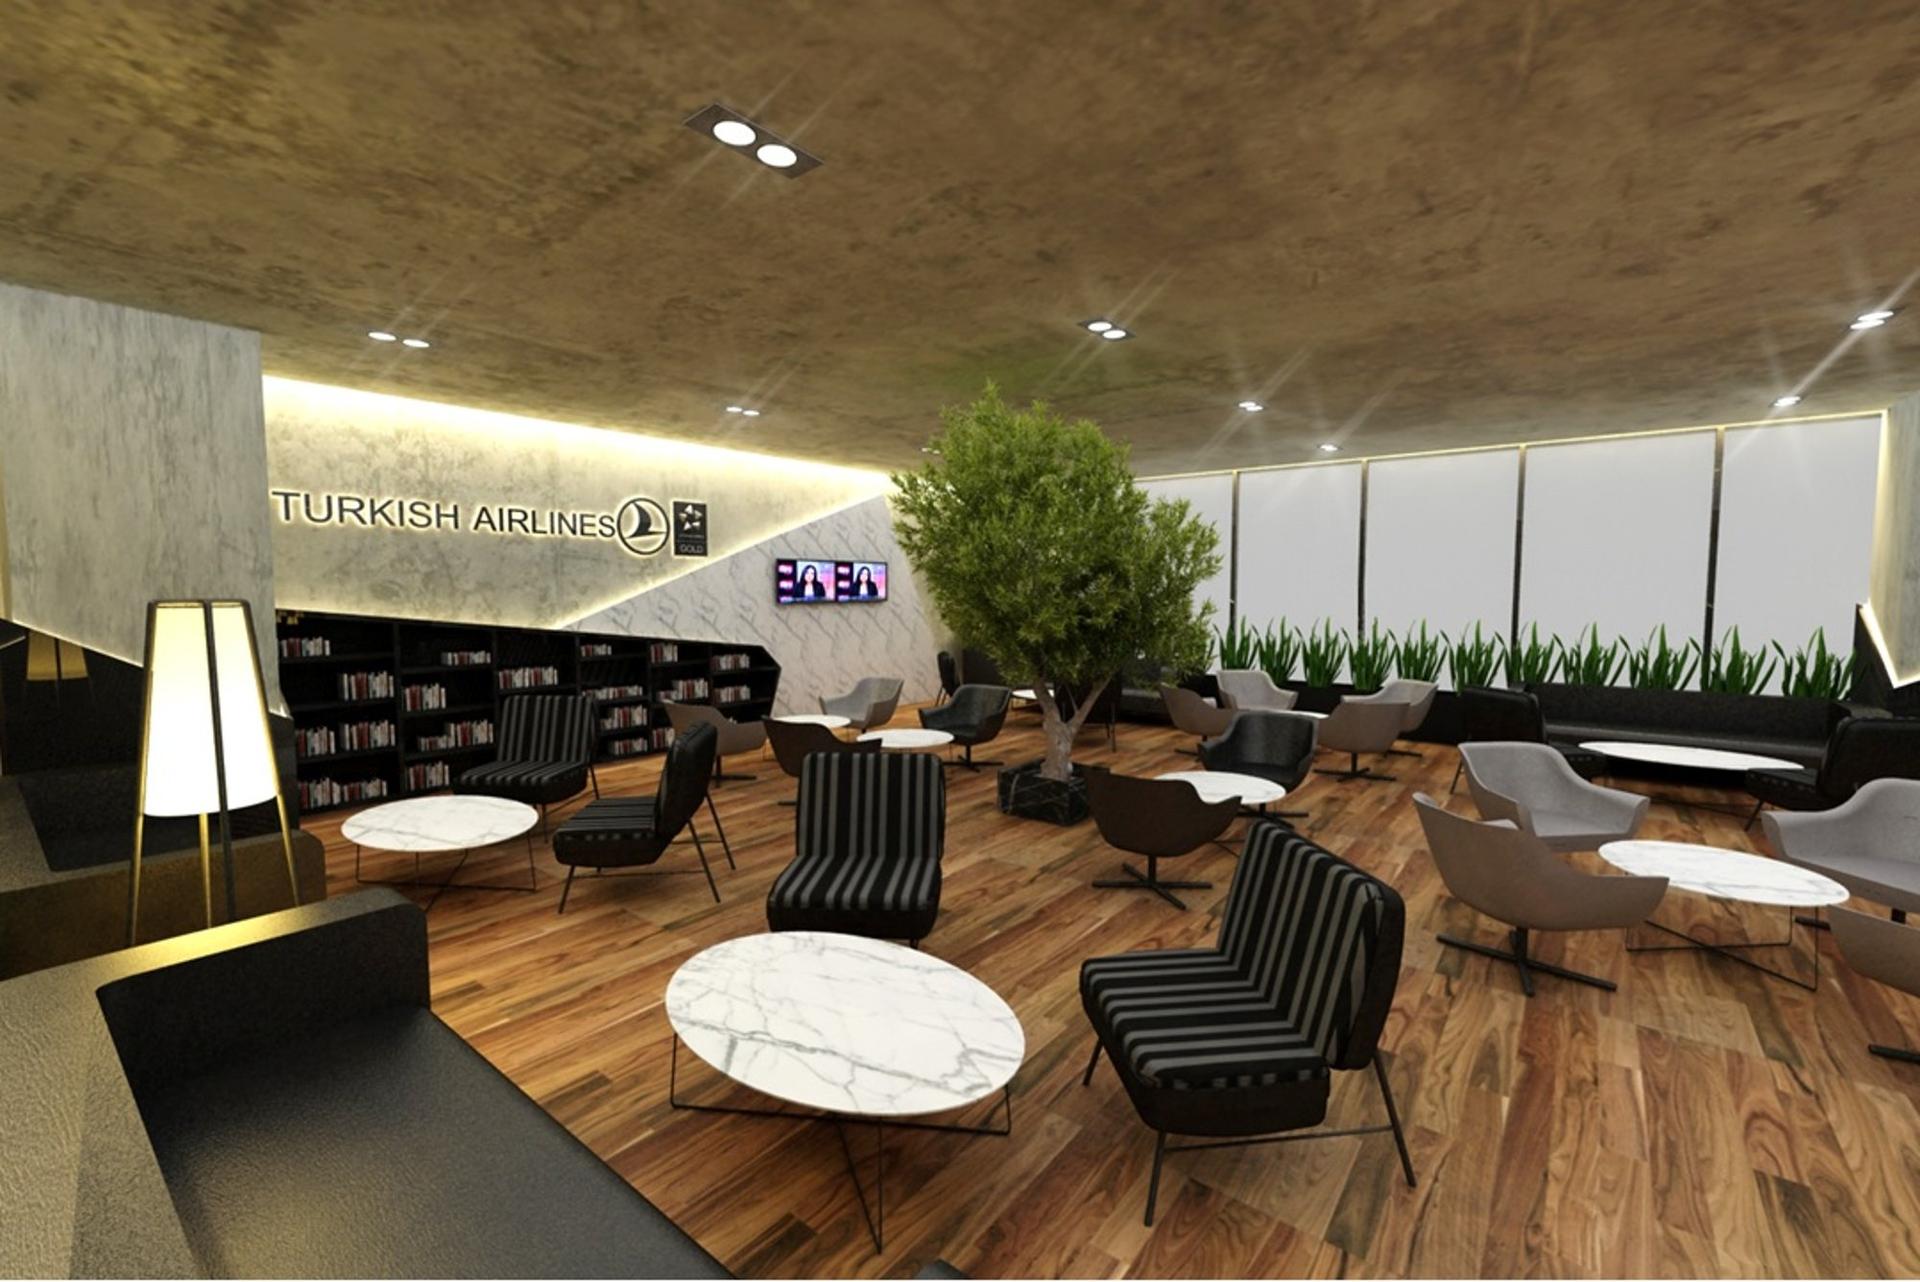 Turkish Airlines CIP Lounge (Business Lounge) image 14 of 27